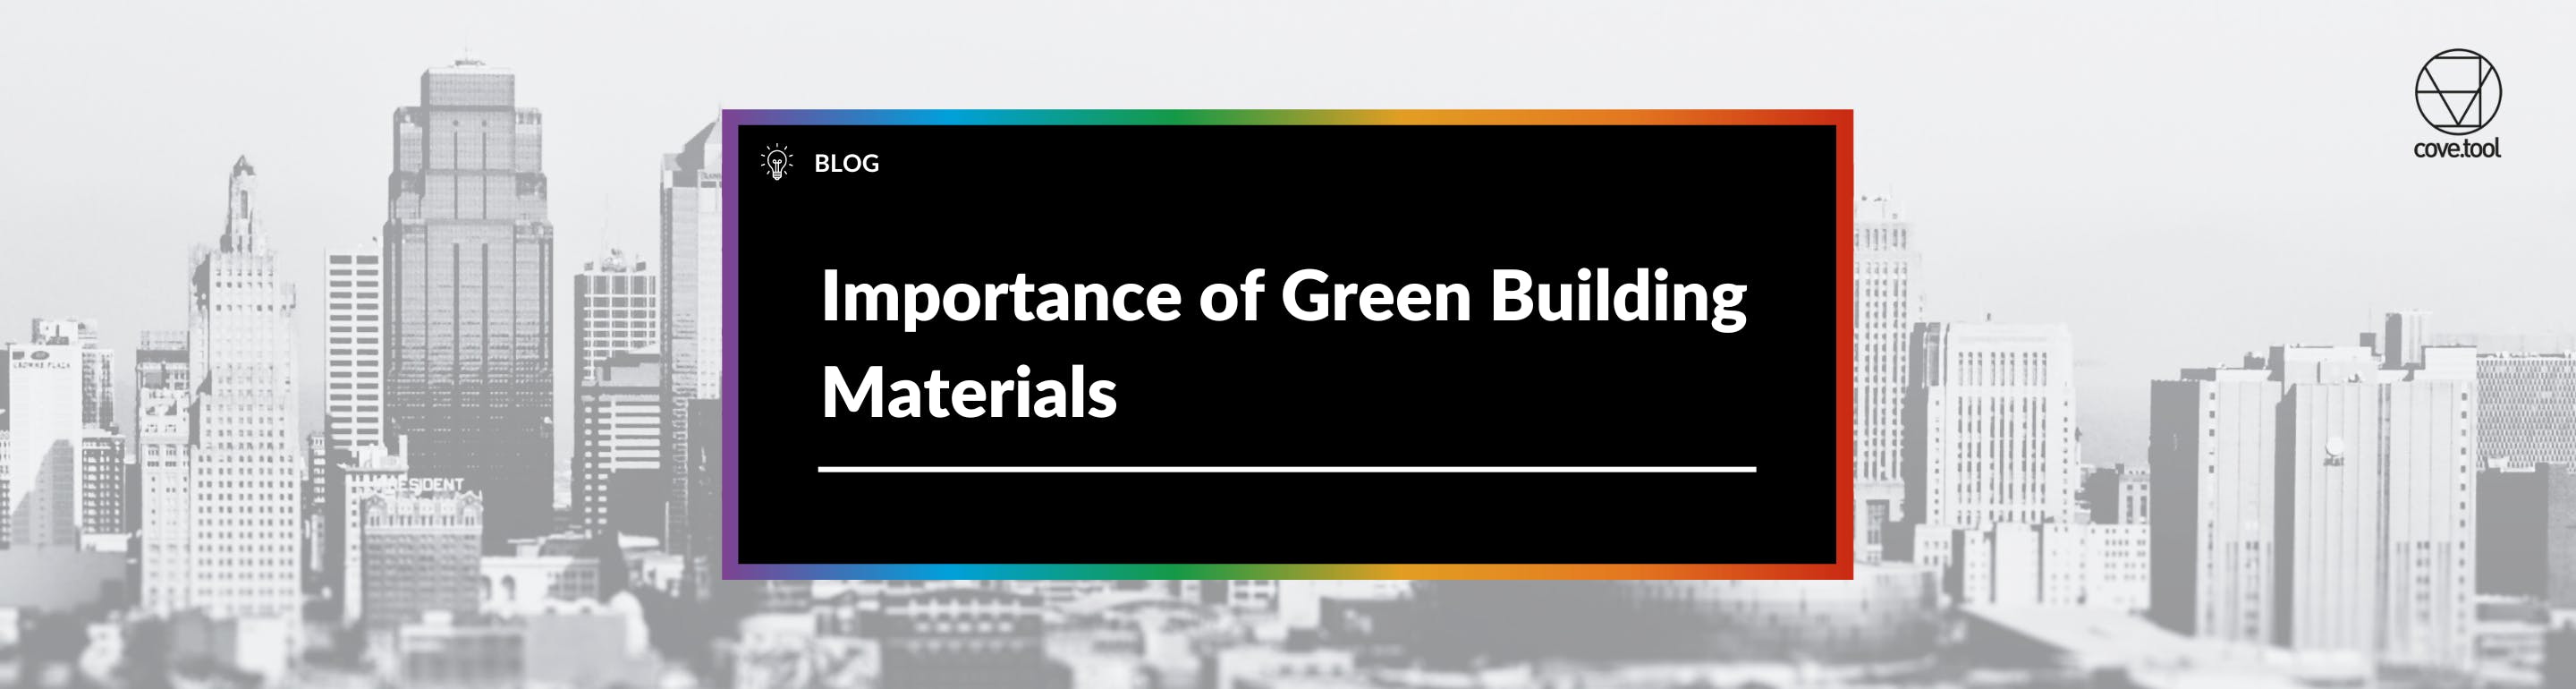 Importance of Green Building Materials 